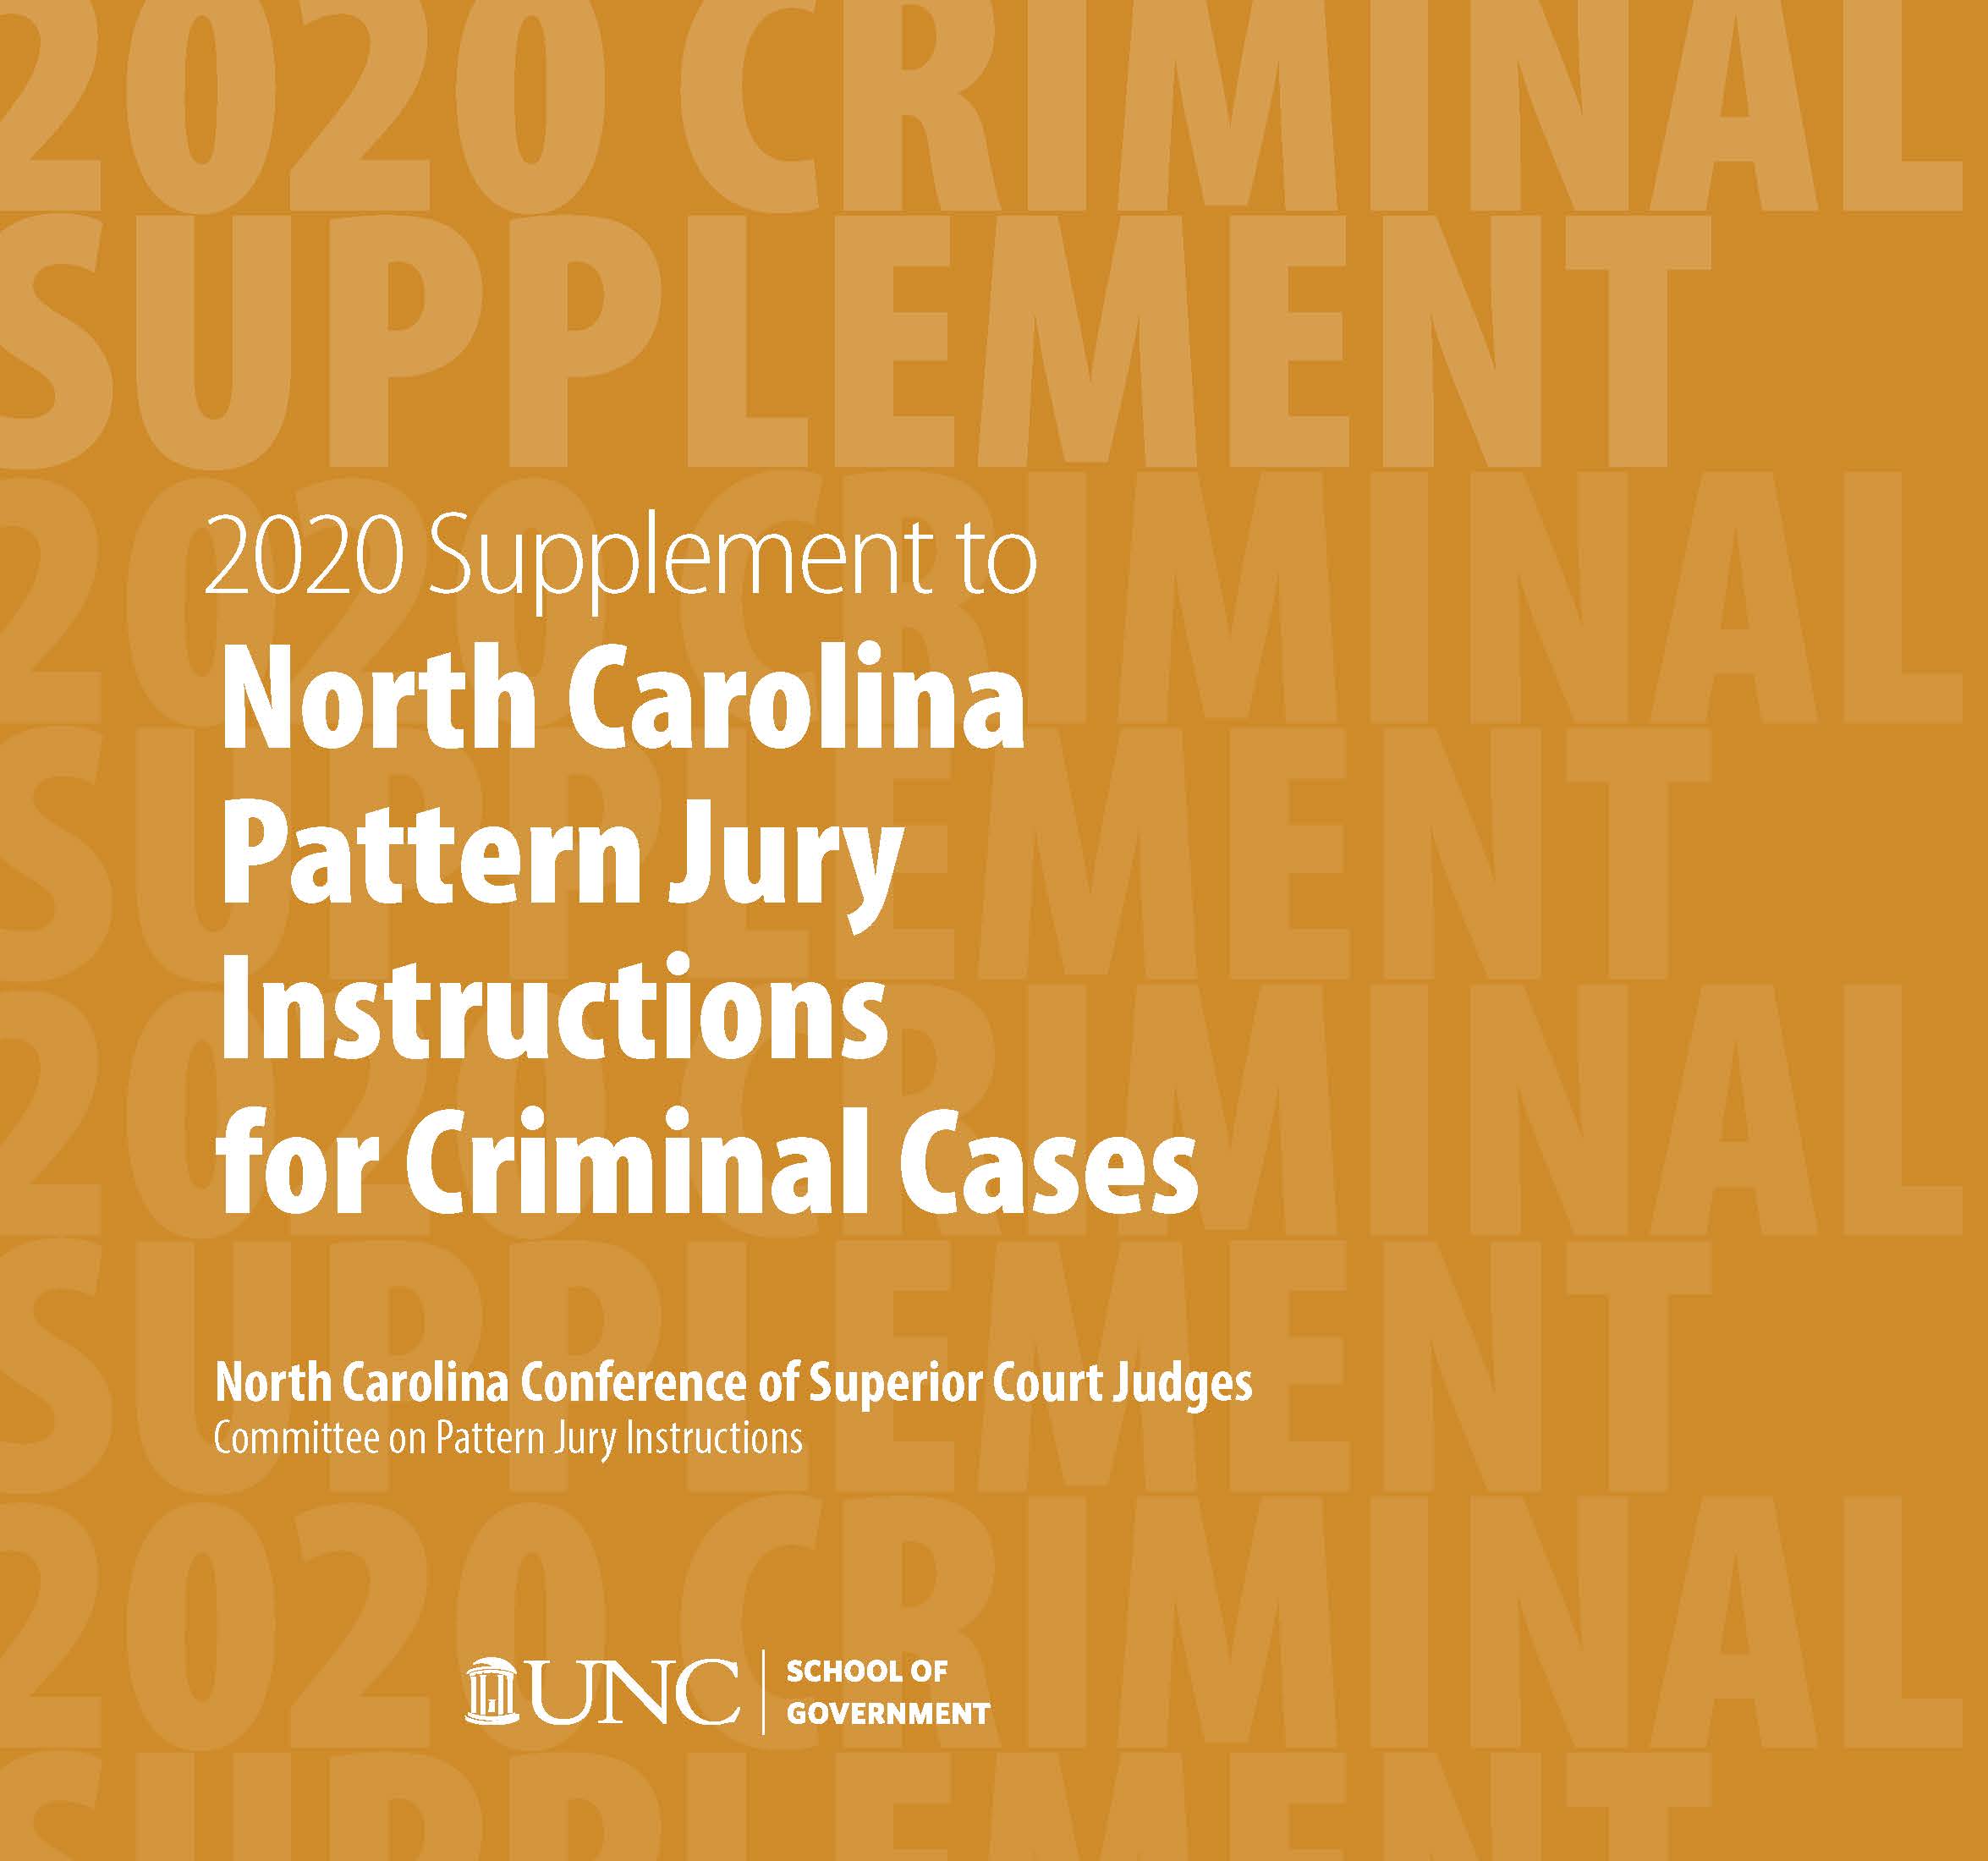 Cover image for June 2020 Supplement to North Carolina Pattern Jury Instructions for Criminal Cases